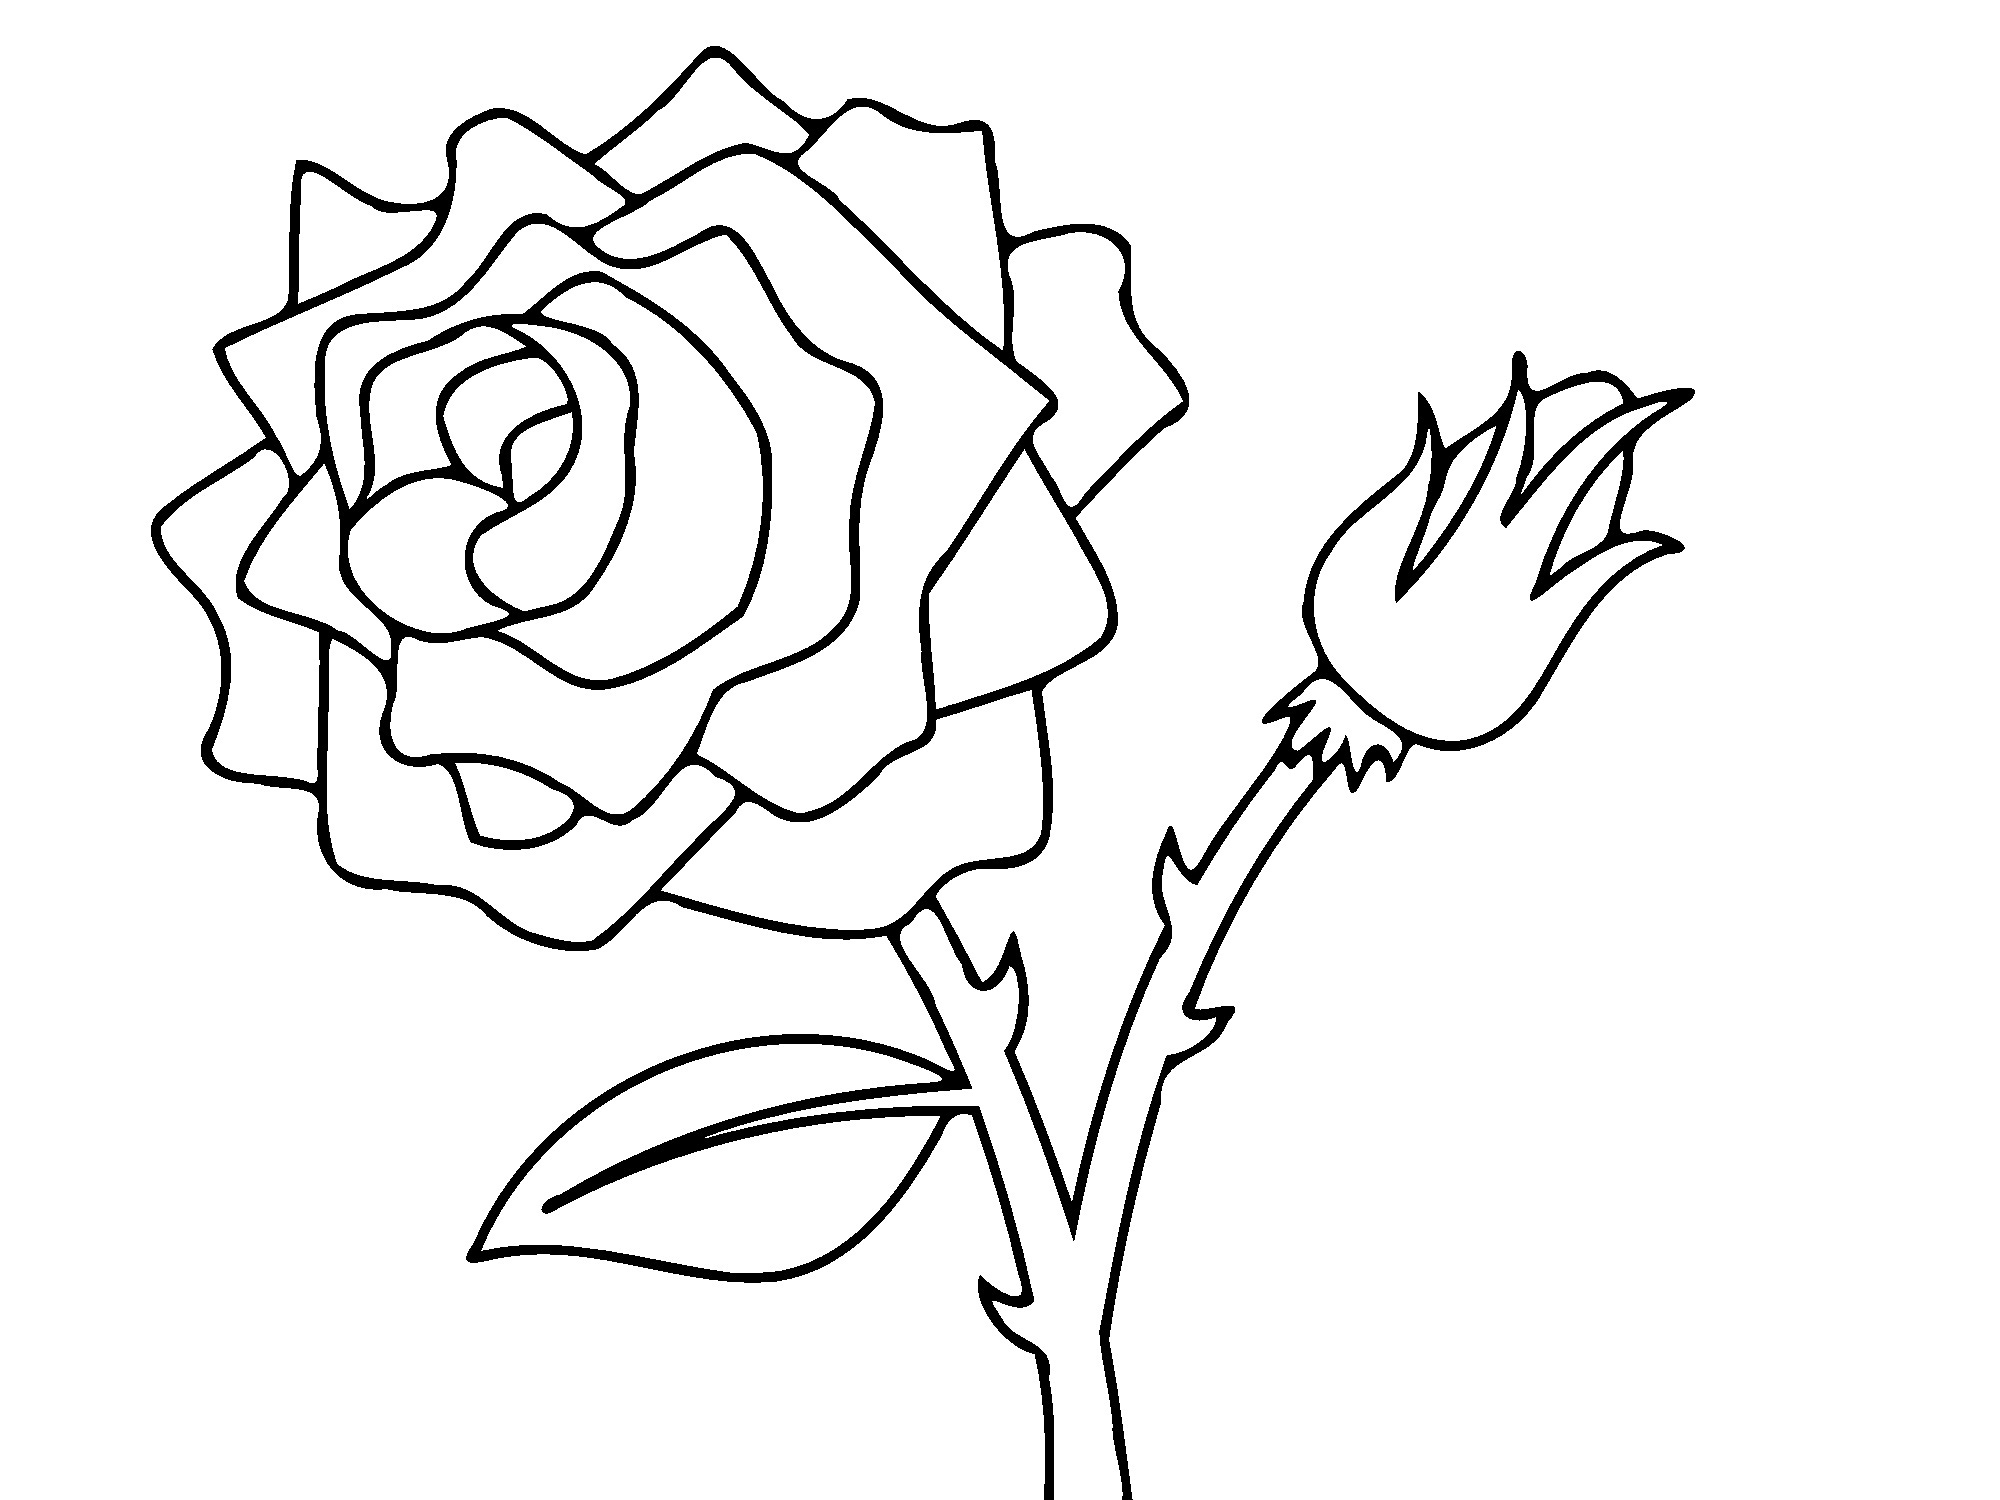 rose art coloring pages